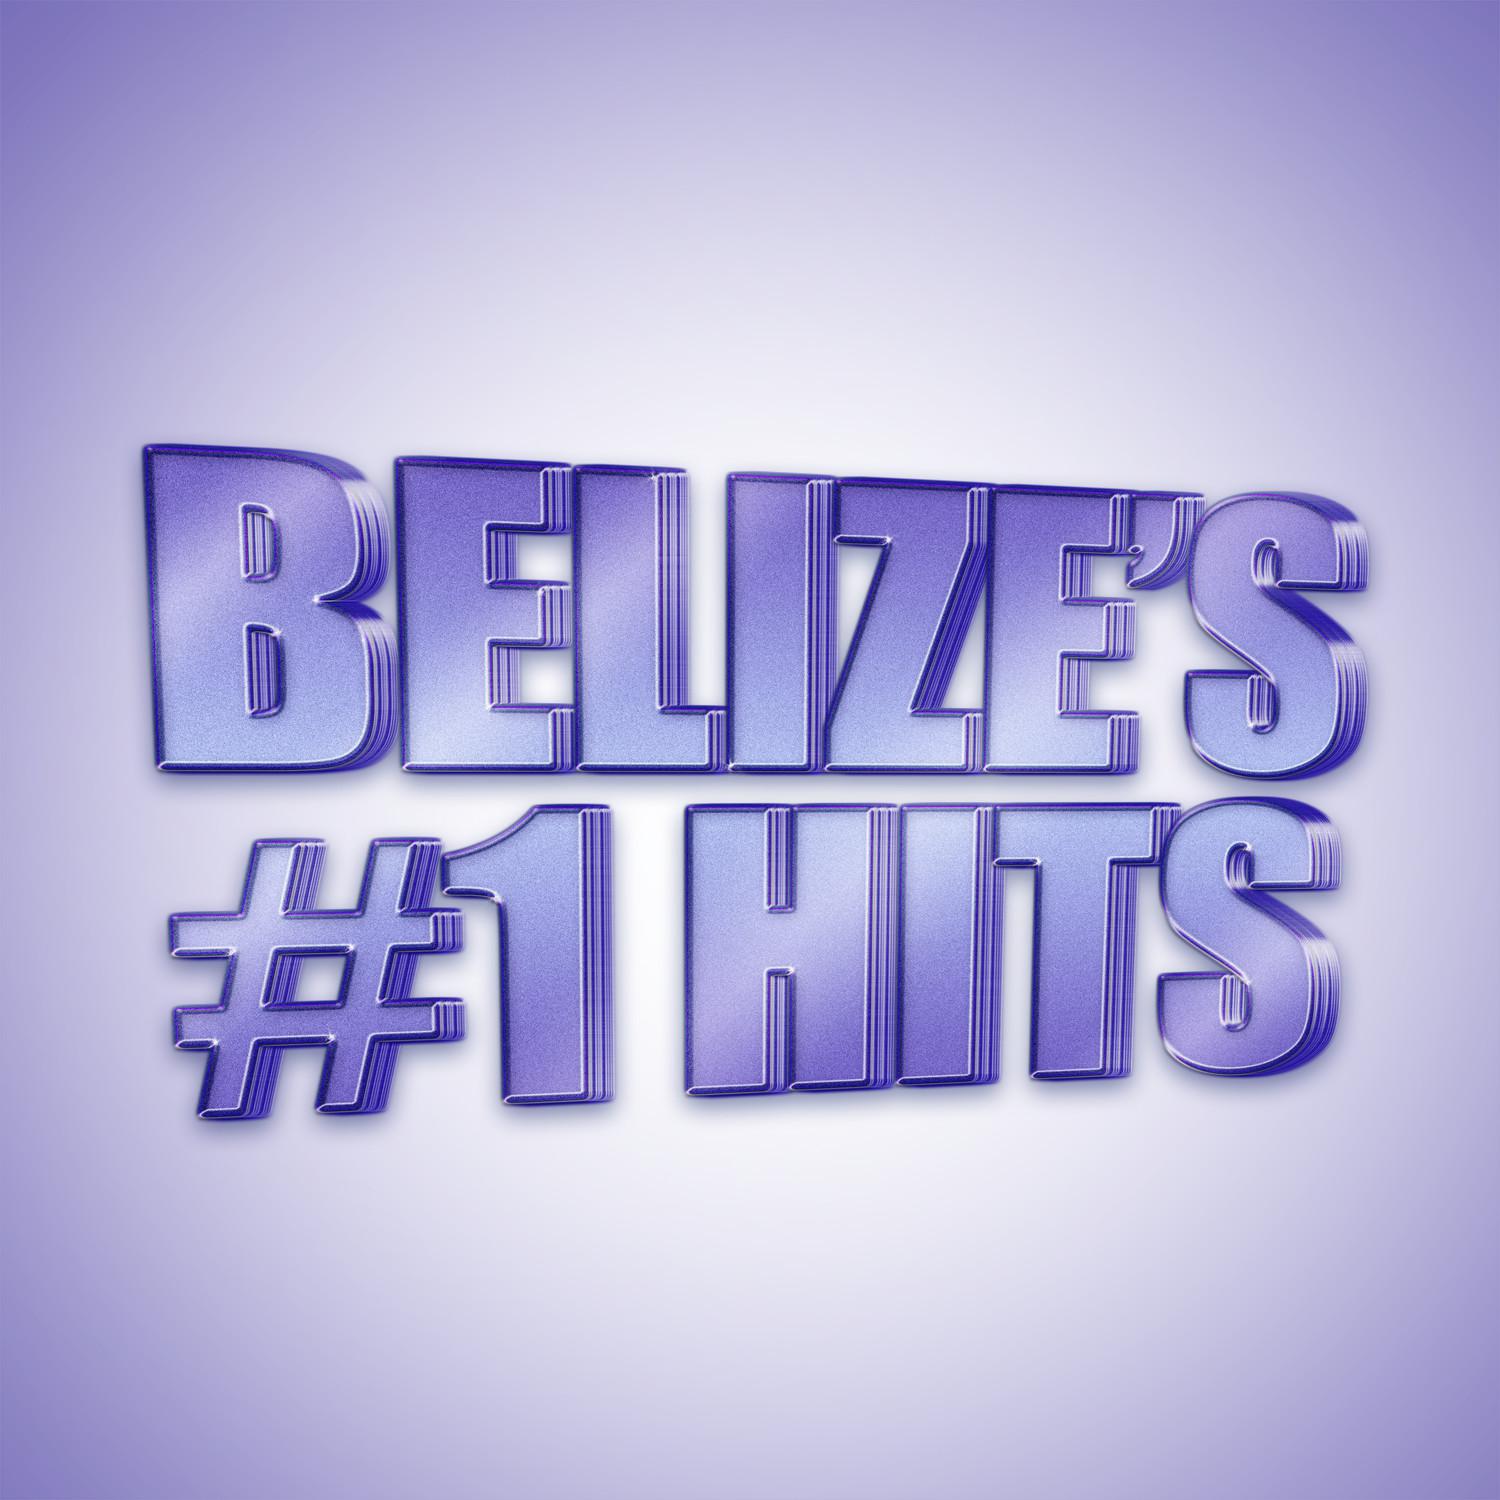 Belize's #1 Hits